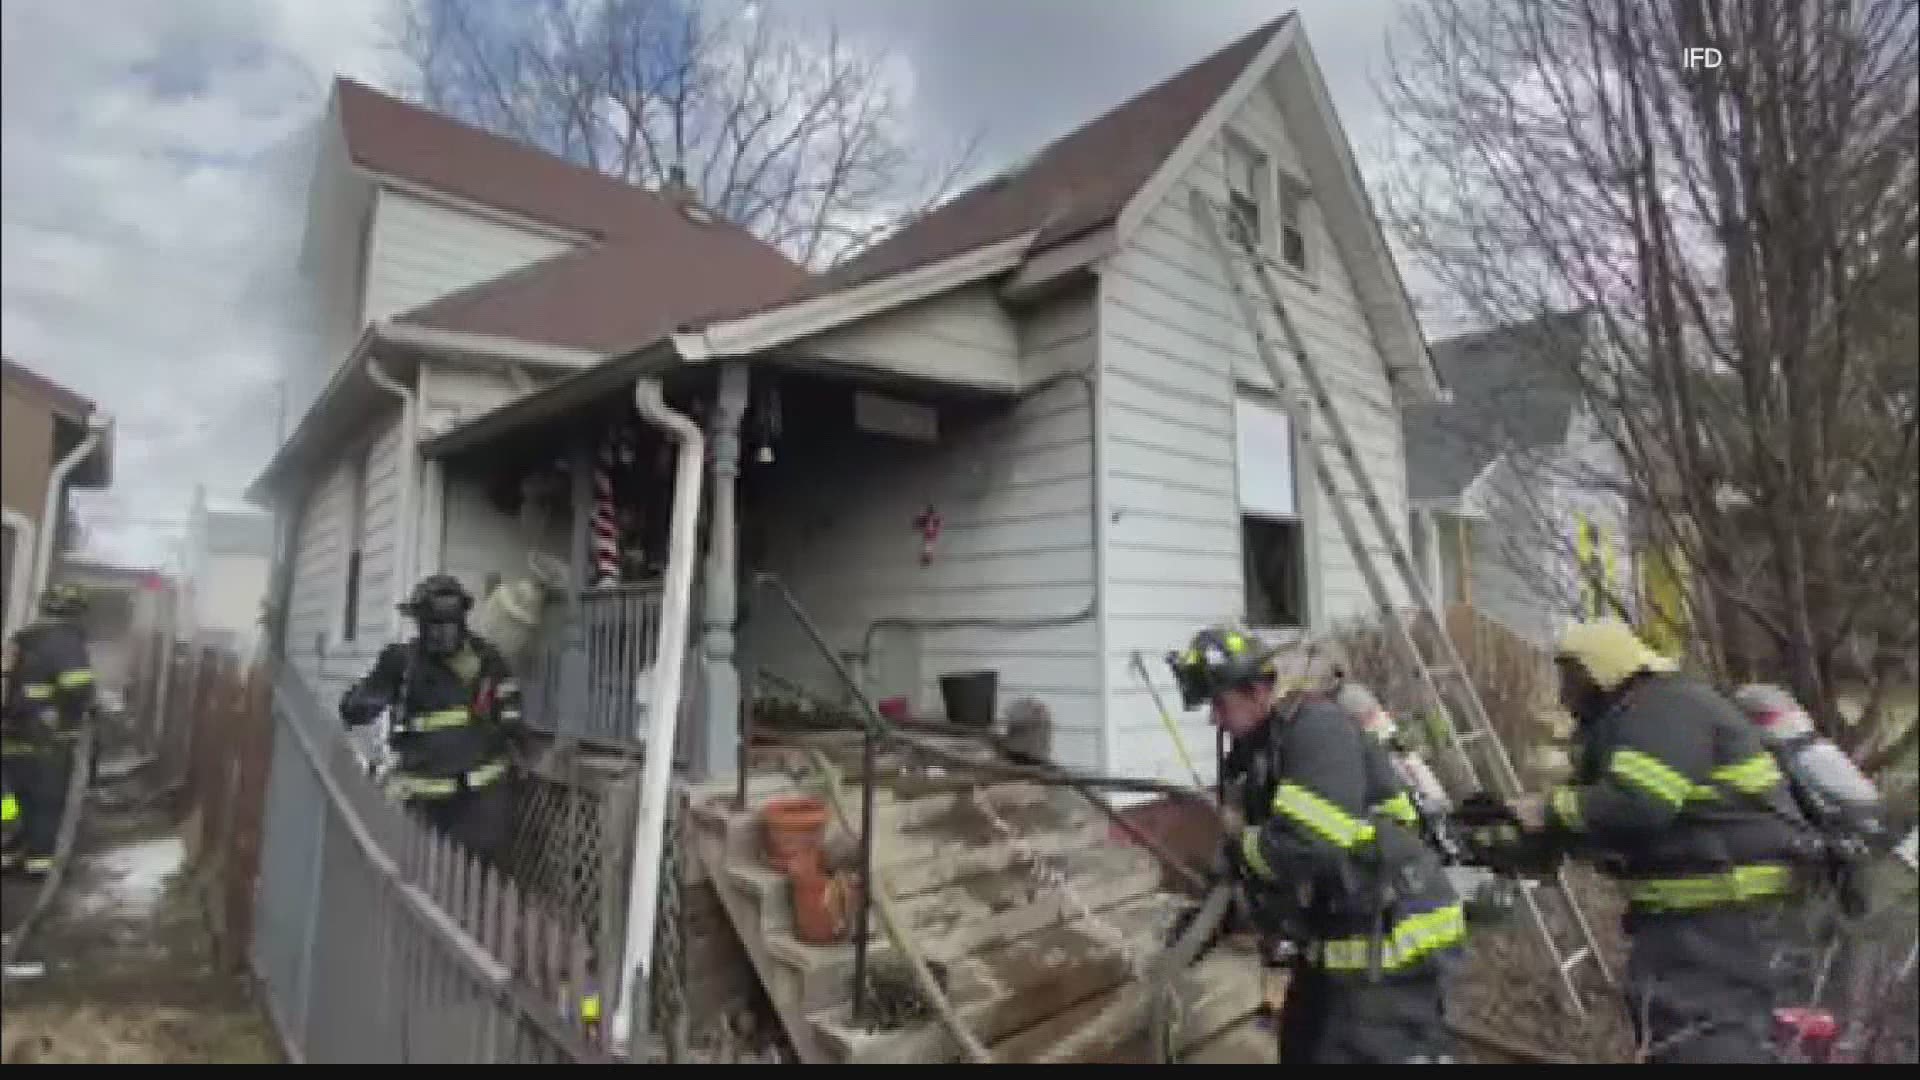 A man is in critical condition after a Wednesday morning fire at his home.